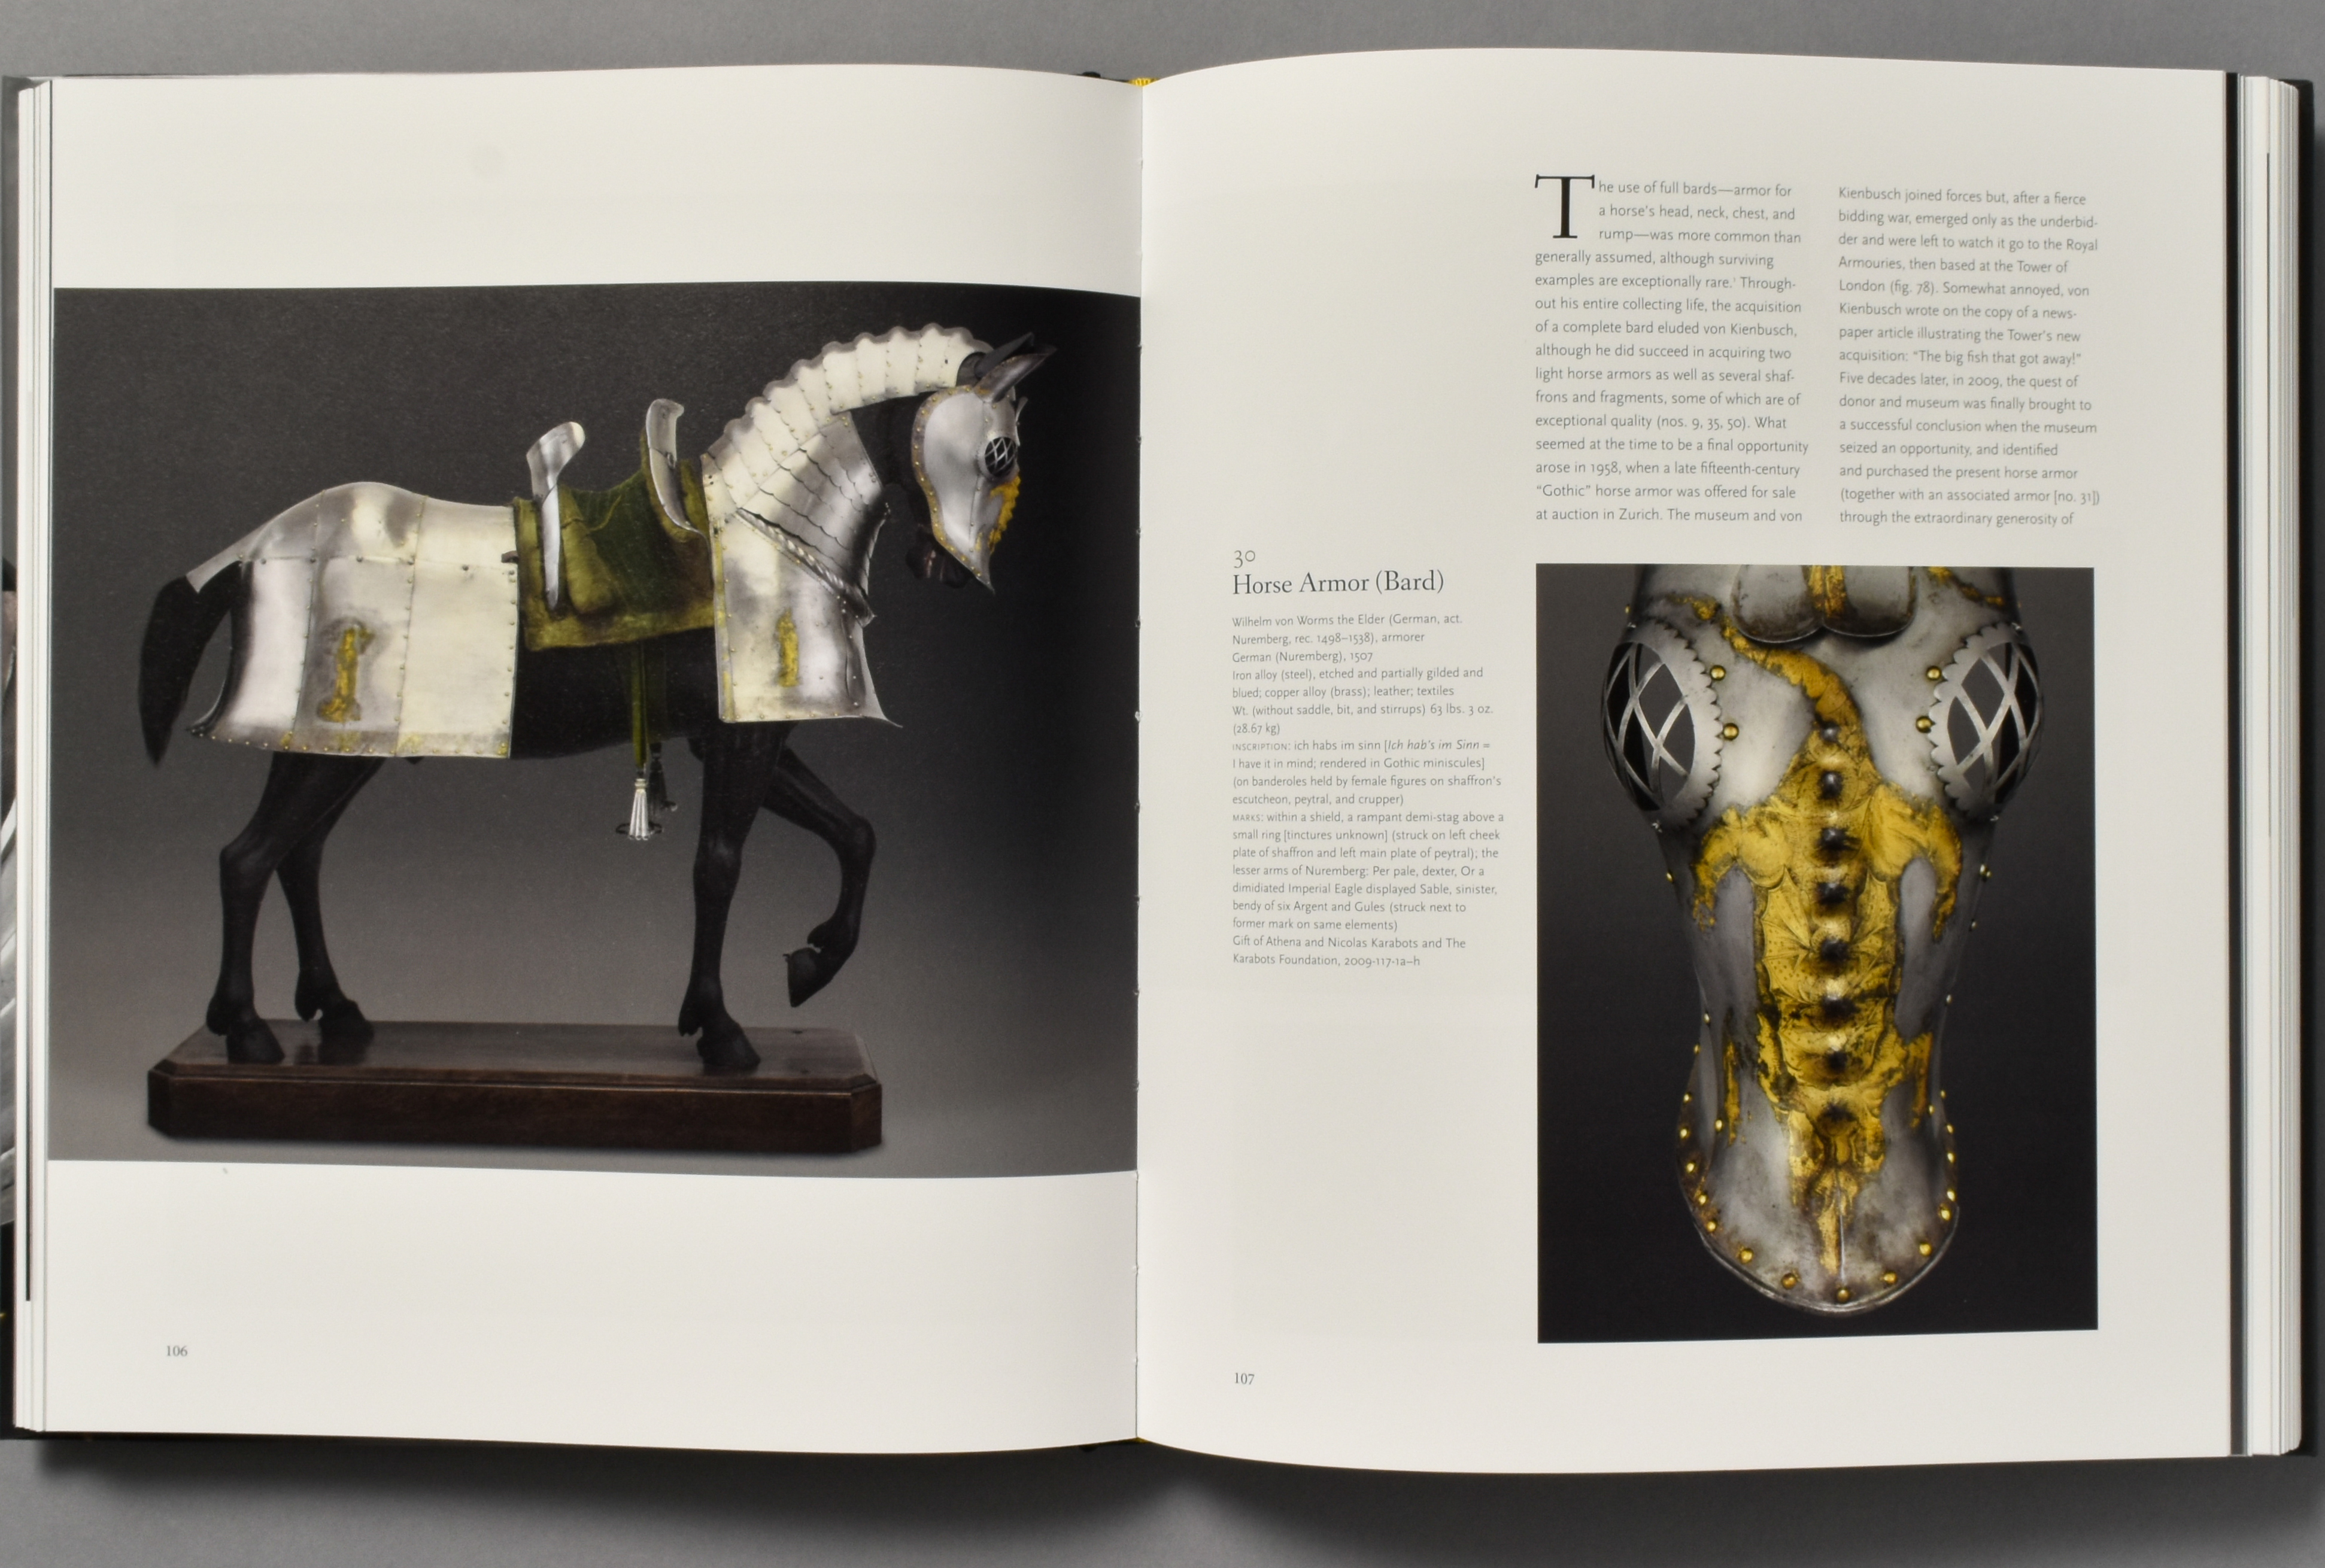 Book - Arms and Armor: Highlights From The Philadelphia Museum of Art